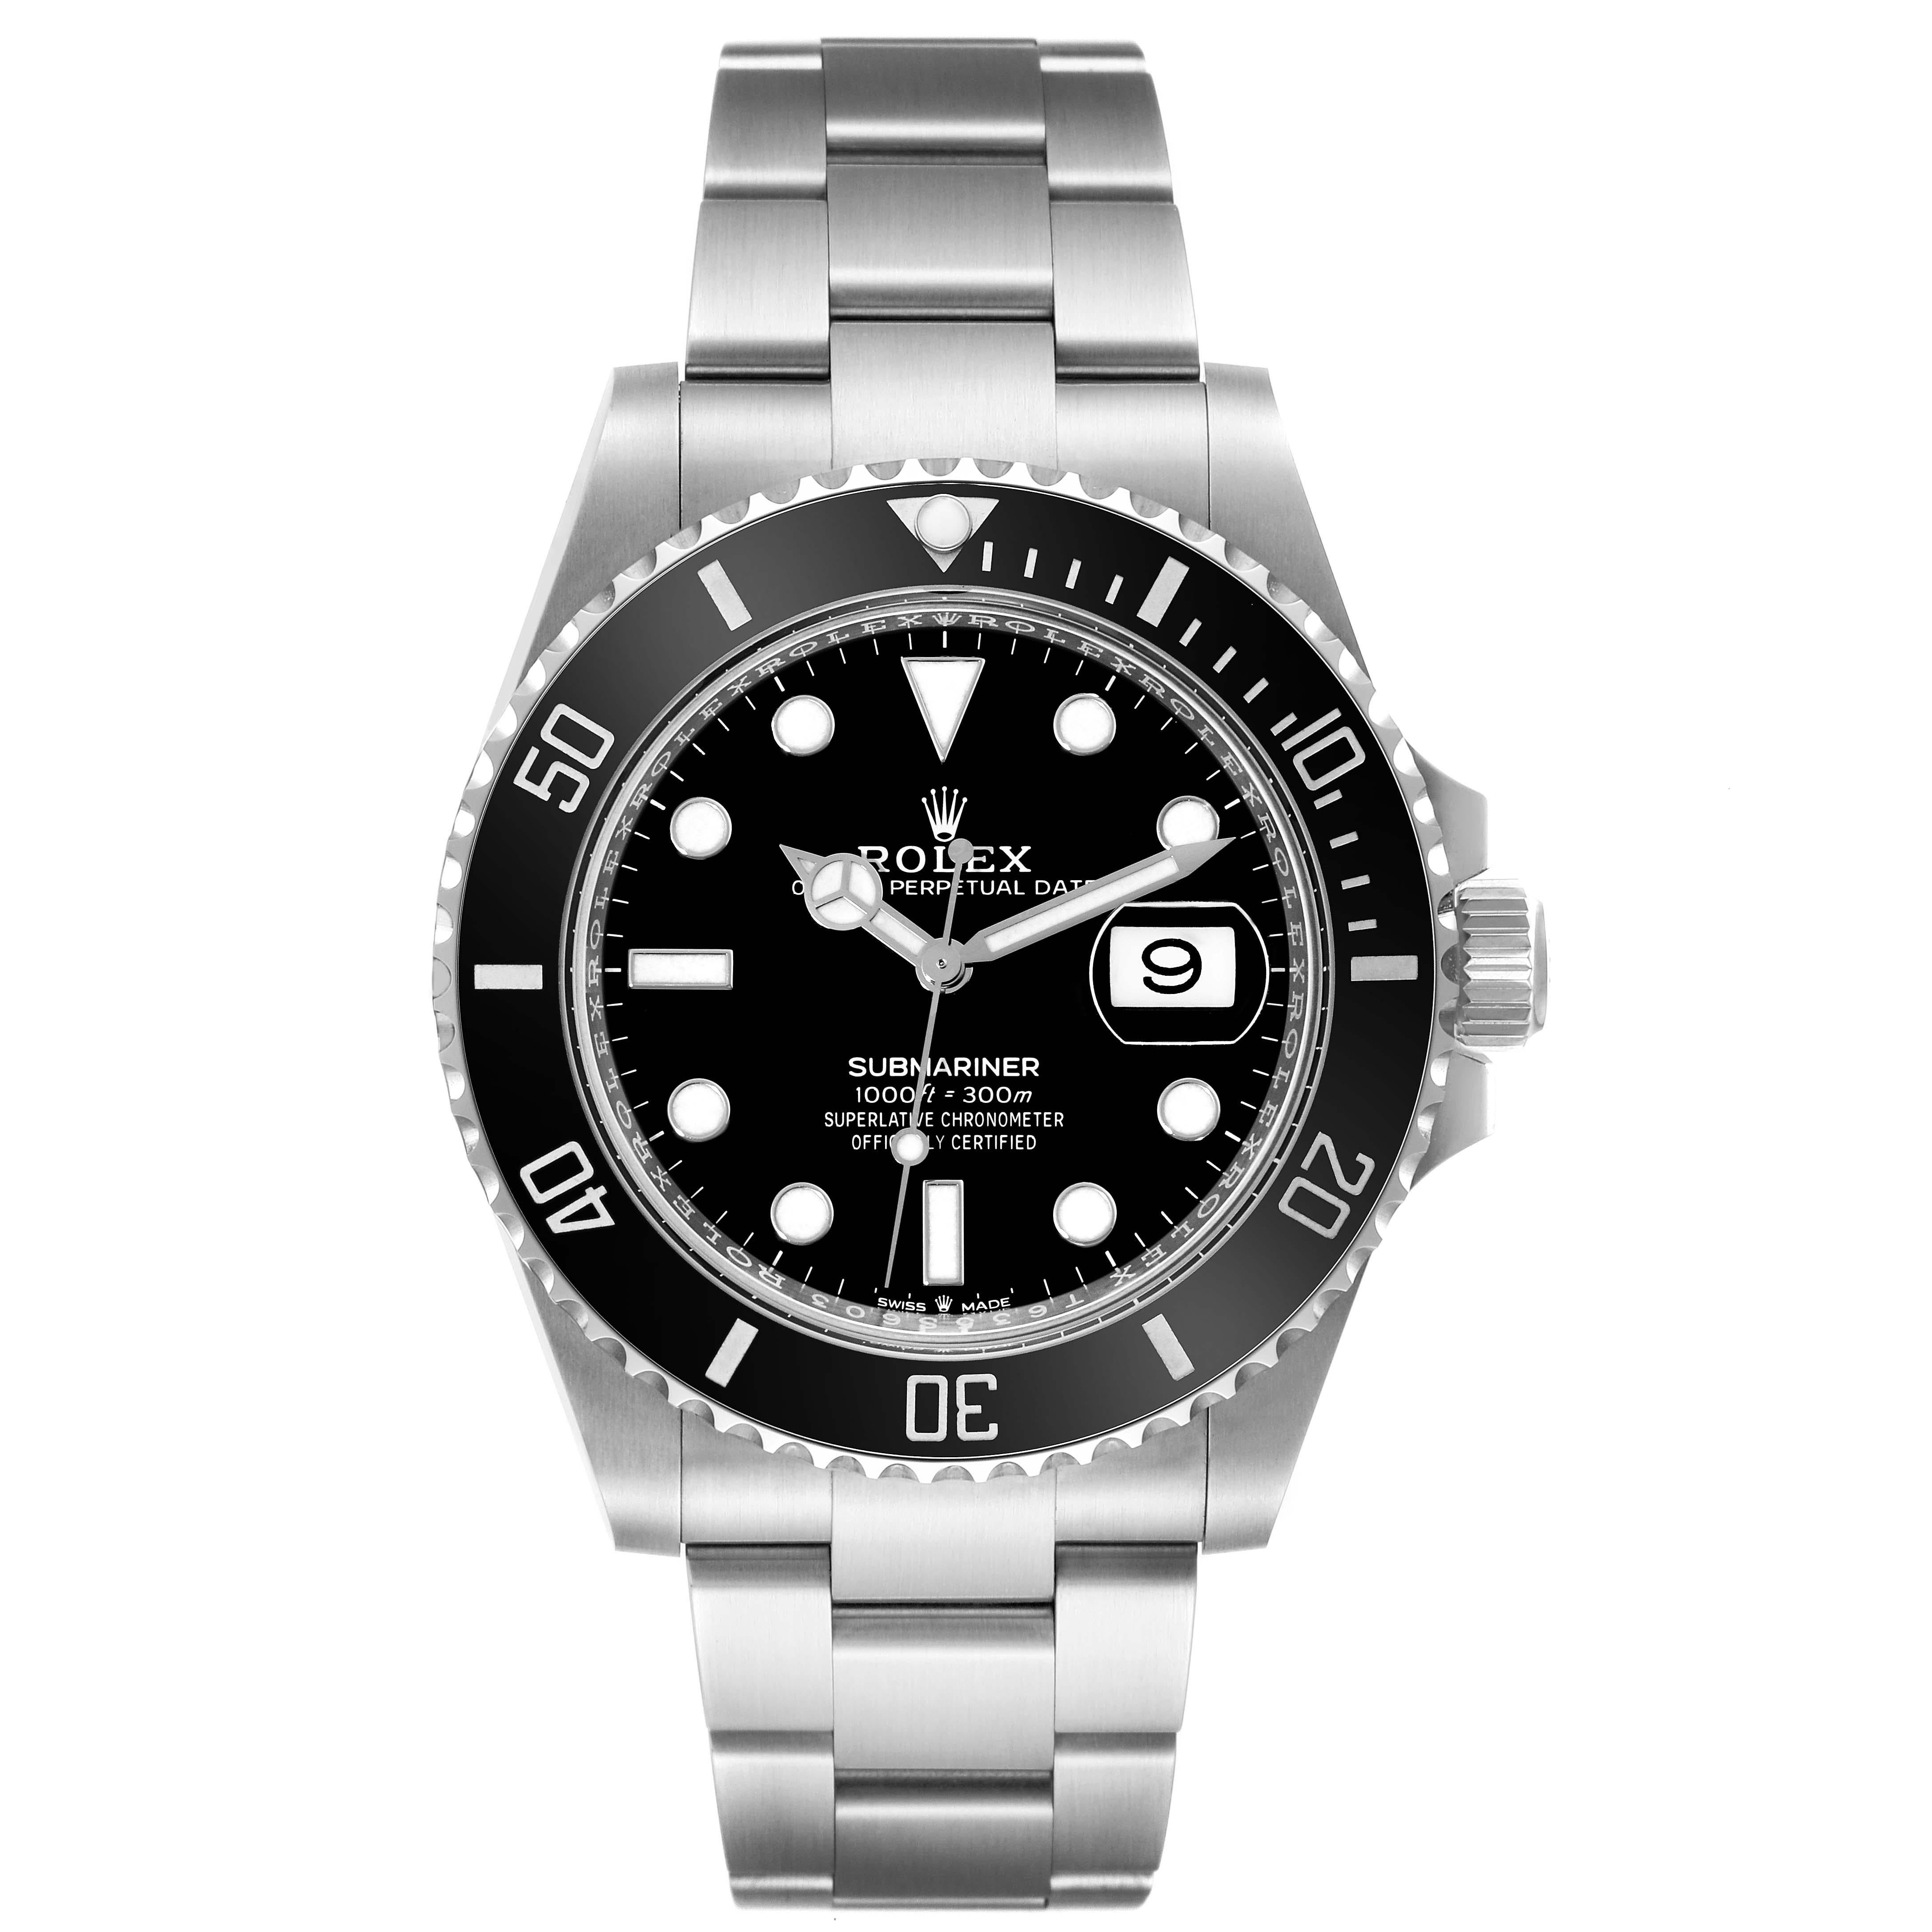 Rolex Submariner Black Dial Ceramic Bezel Steel Mens Watch 126610 Unworn. Officially certified chronometer automatic self-winding movement. Stainless steel case 41 mm in diameter. Rolex logo on the crown. Unidirectional rotating black ceramic bezel